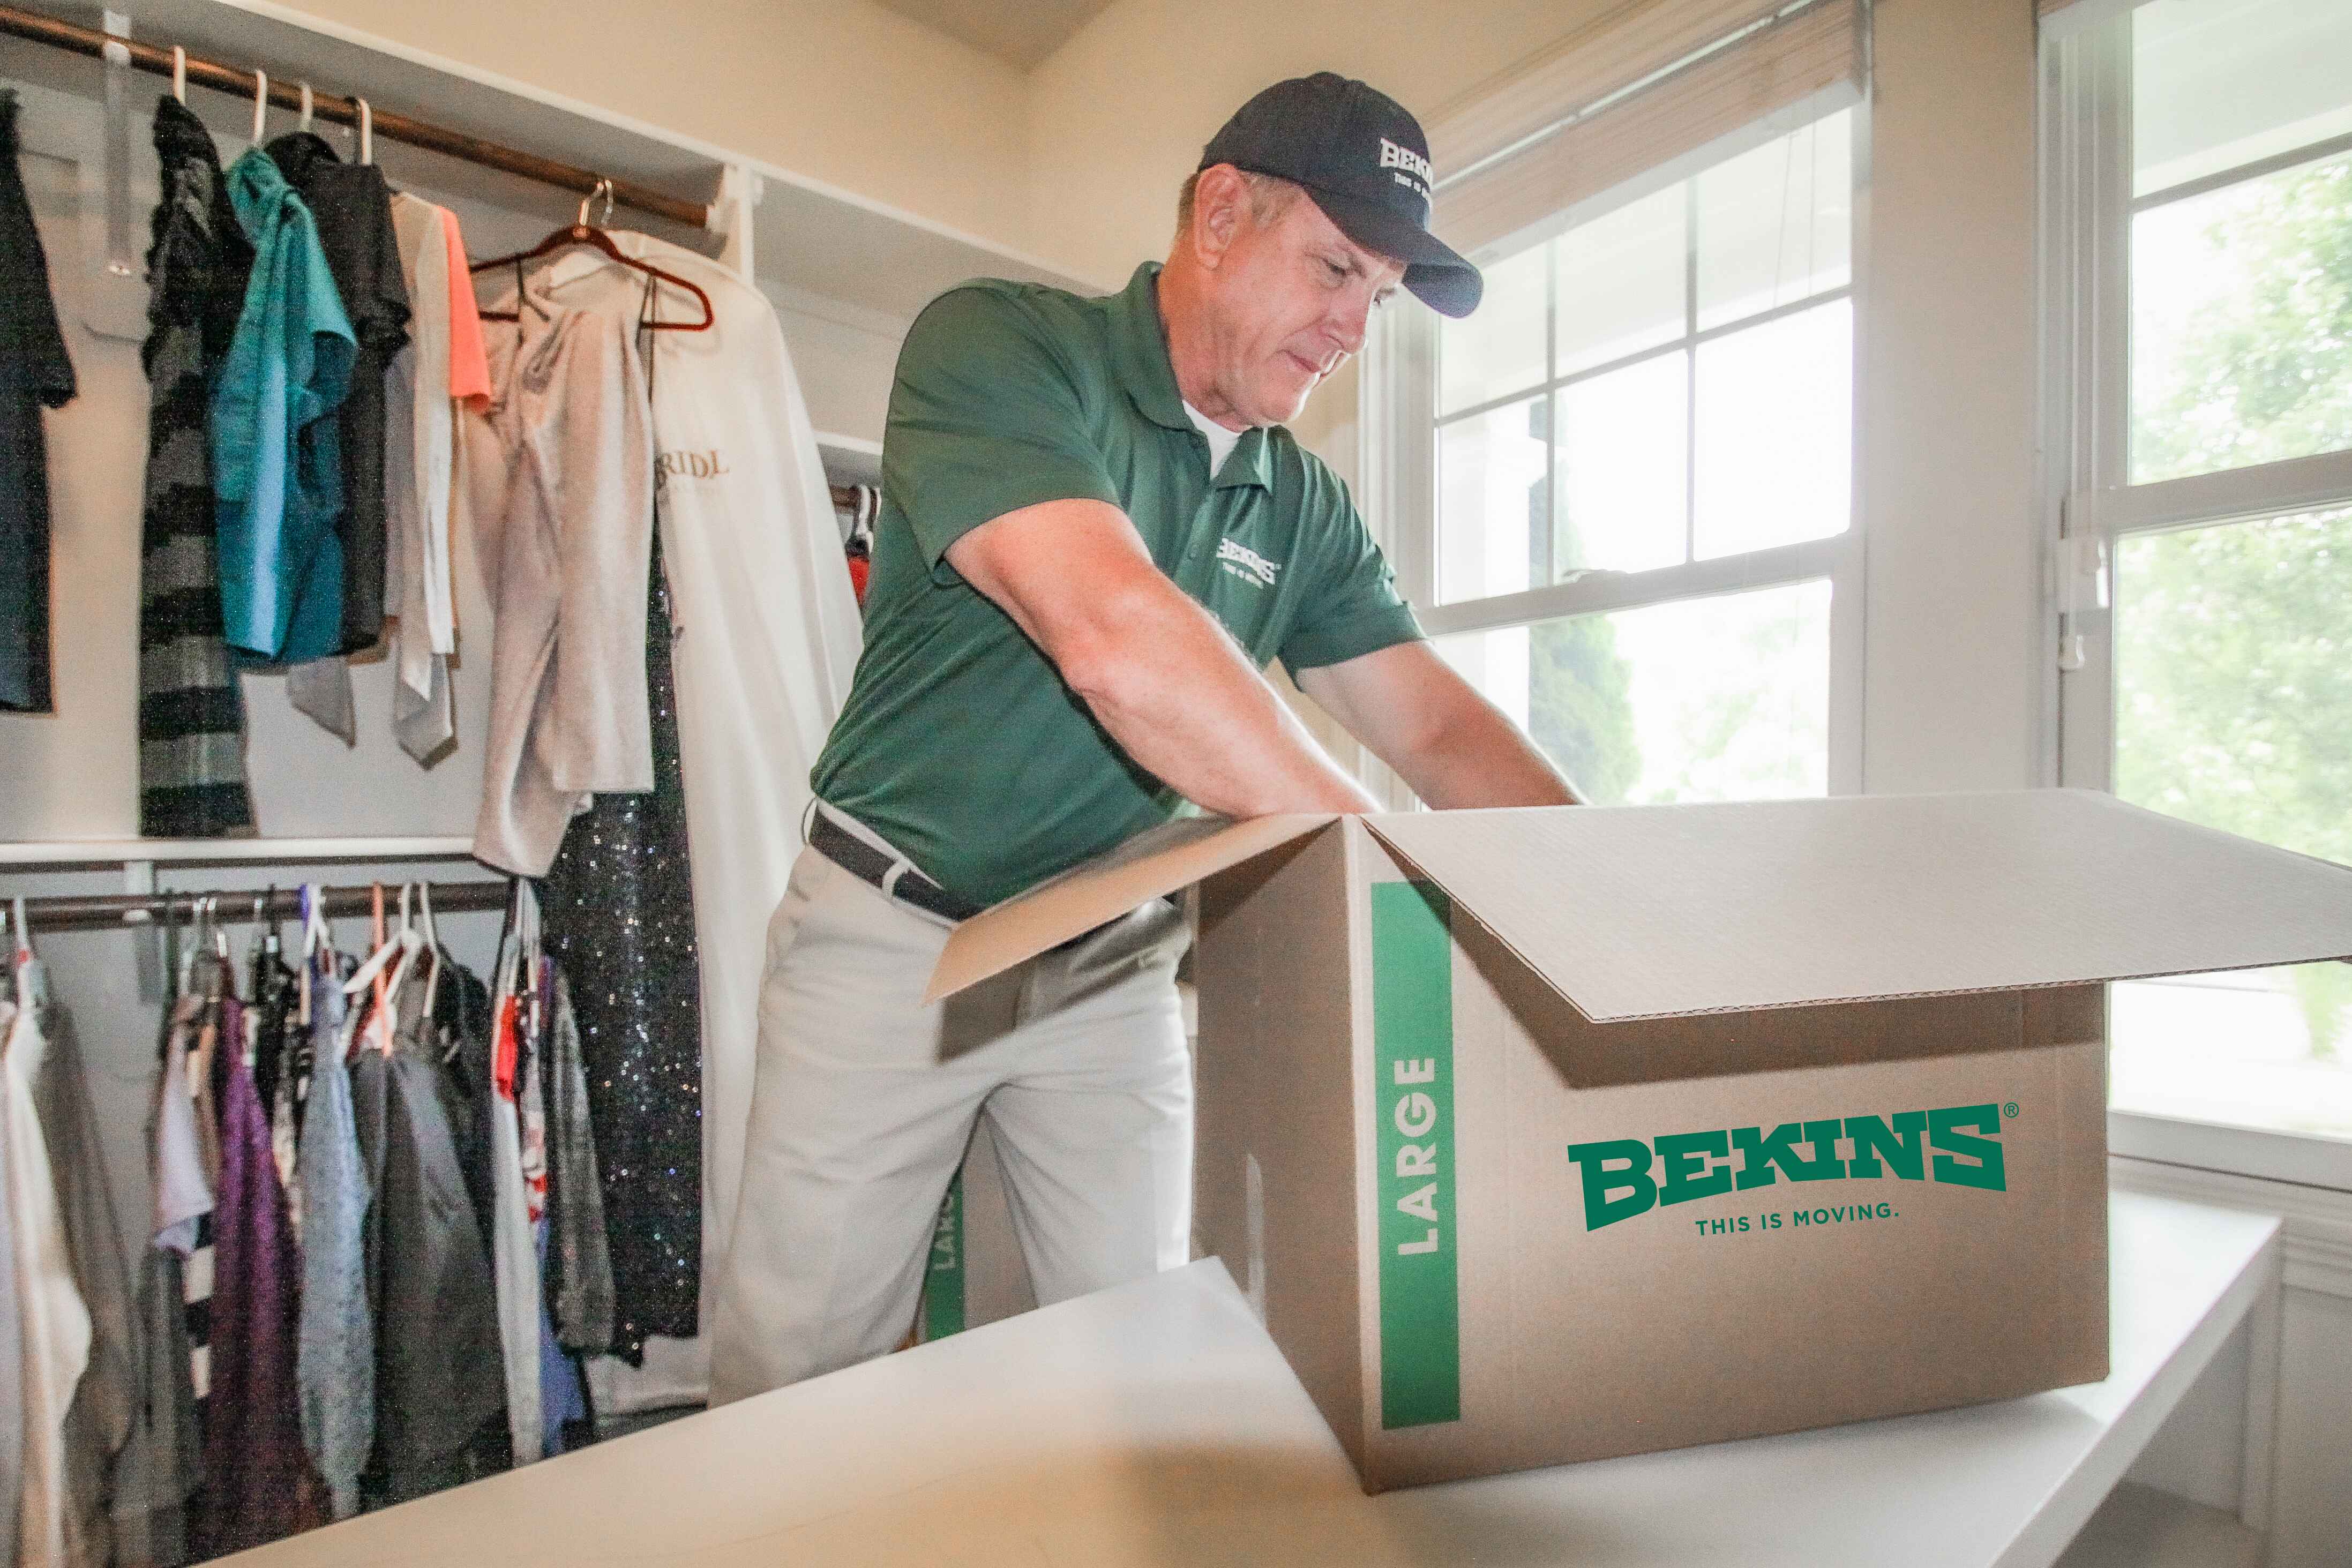 Bekins mover packing clothes.